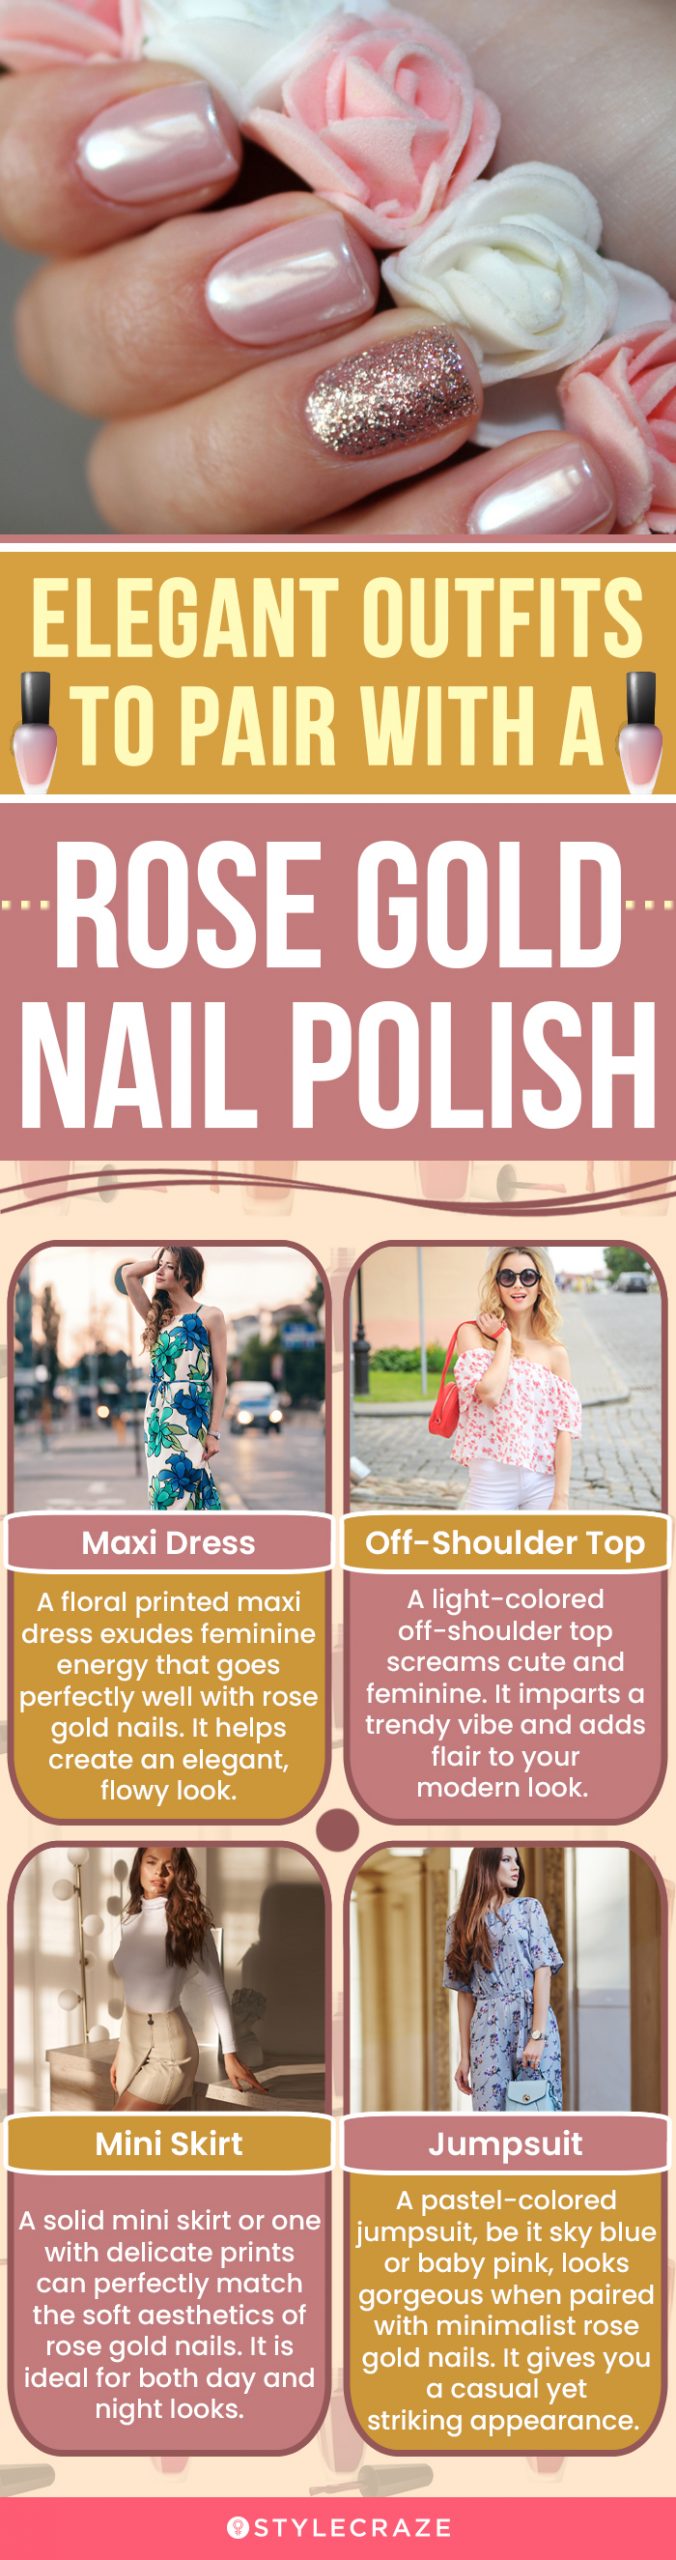 Elegant Outfits To Pair With A Rose Gold Nail Polish (infographic)